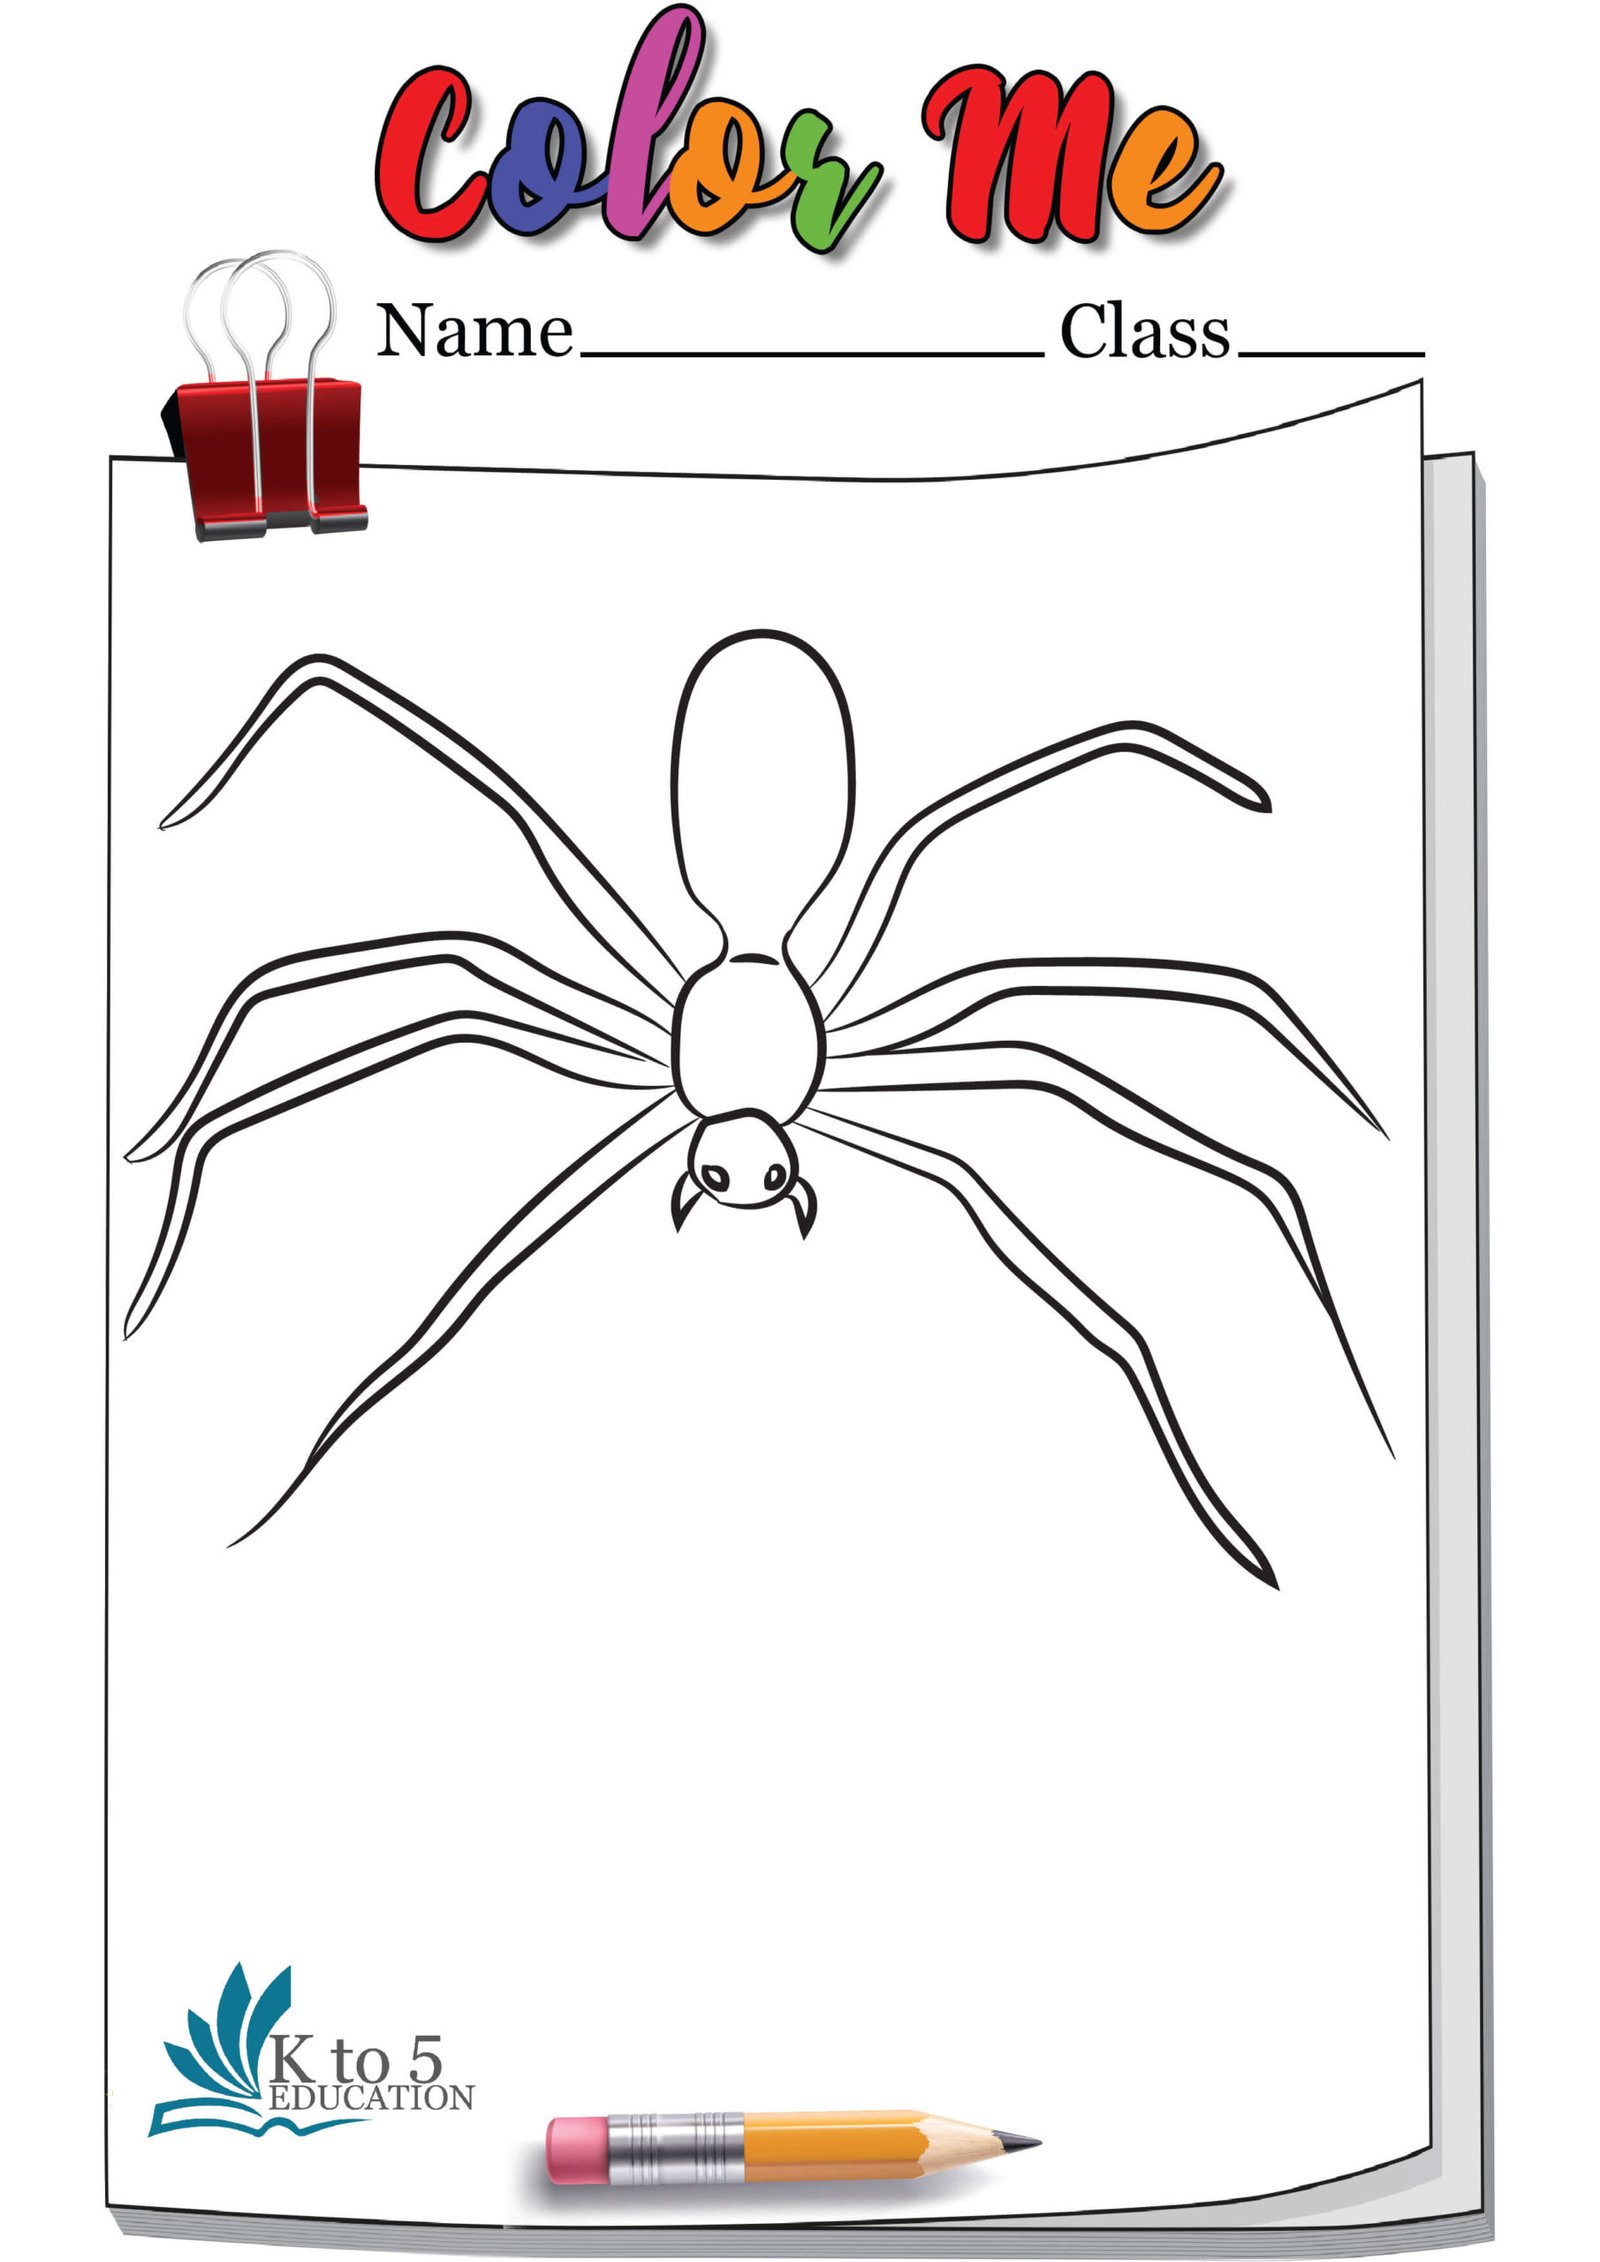 Spider Ready to jump coloring page worksheet